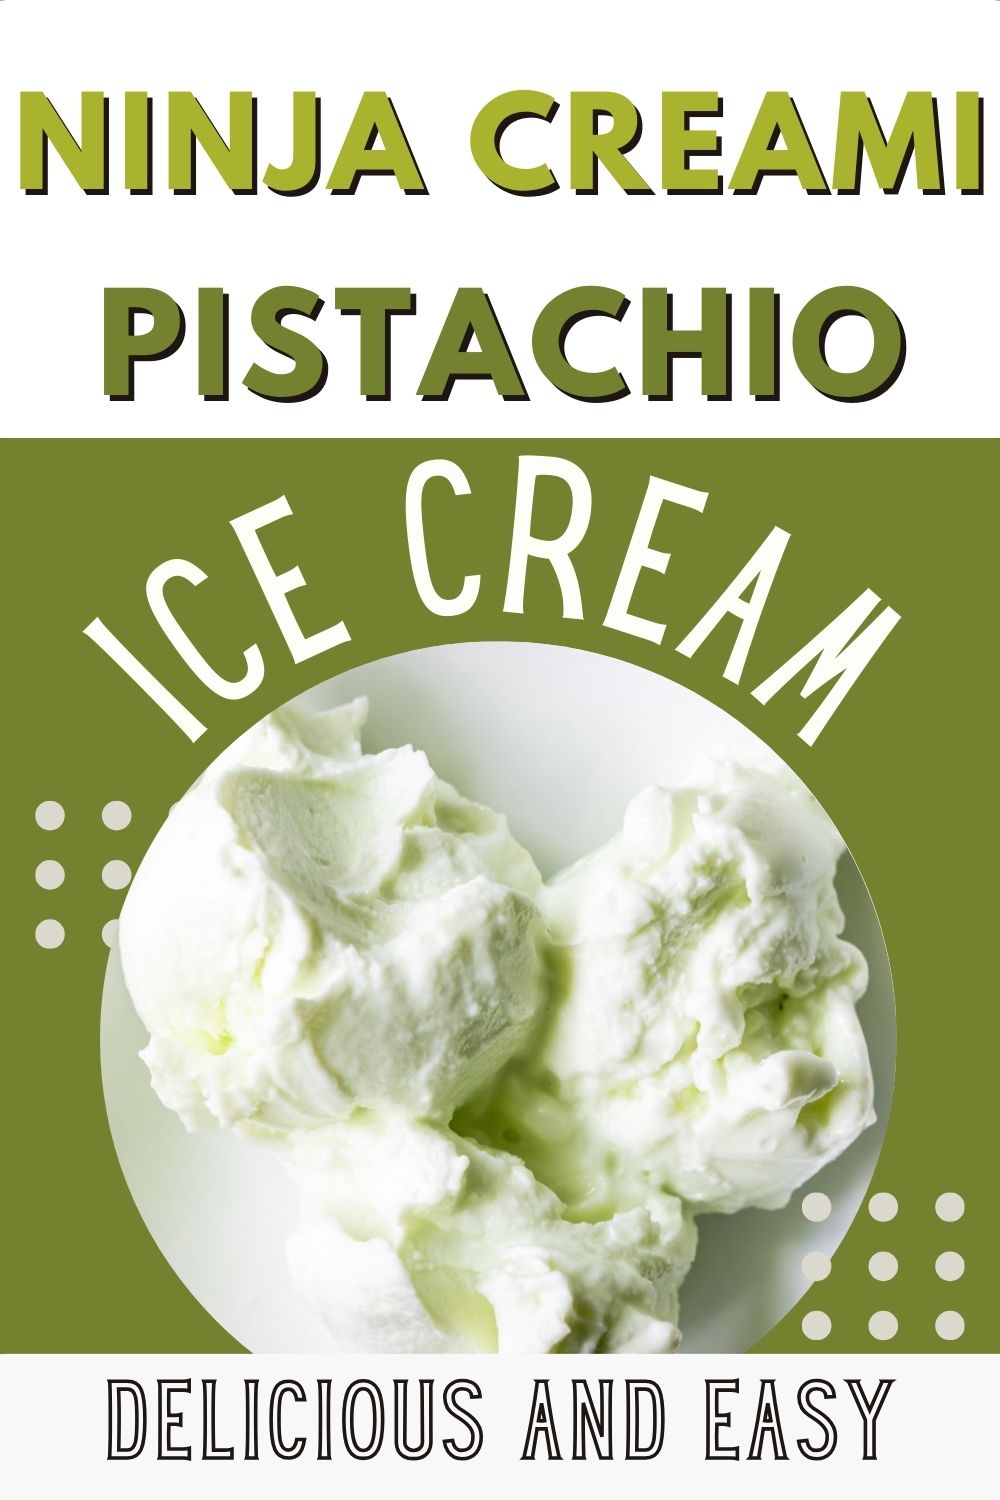 A bowl of pistachio ice cream with text reading "Ninja Creami Pistachio Ice Cream. Delicious and Easy." on a green and white background. The perfect treat for pistachio ice cream lovers!